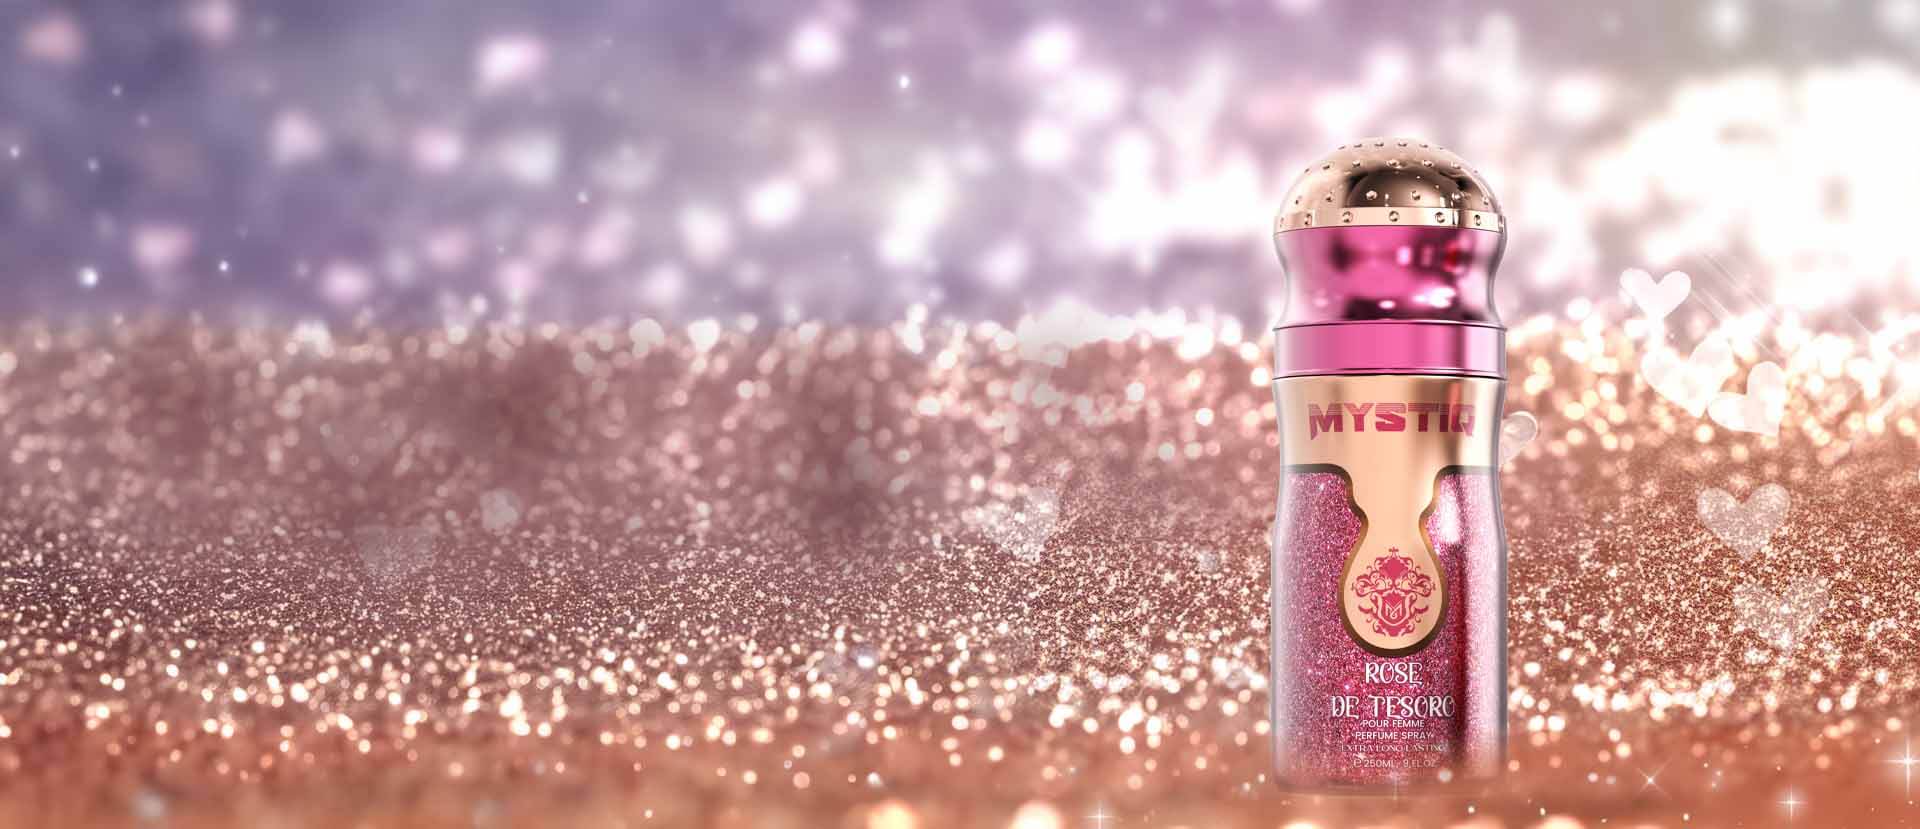 A pink rose body spray by Savia Exclusive with pink glitter background